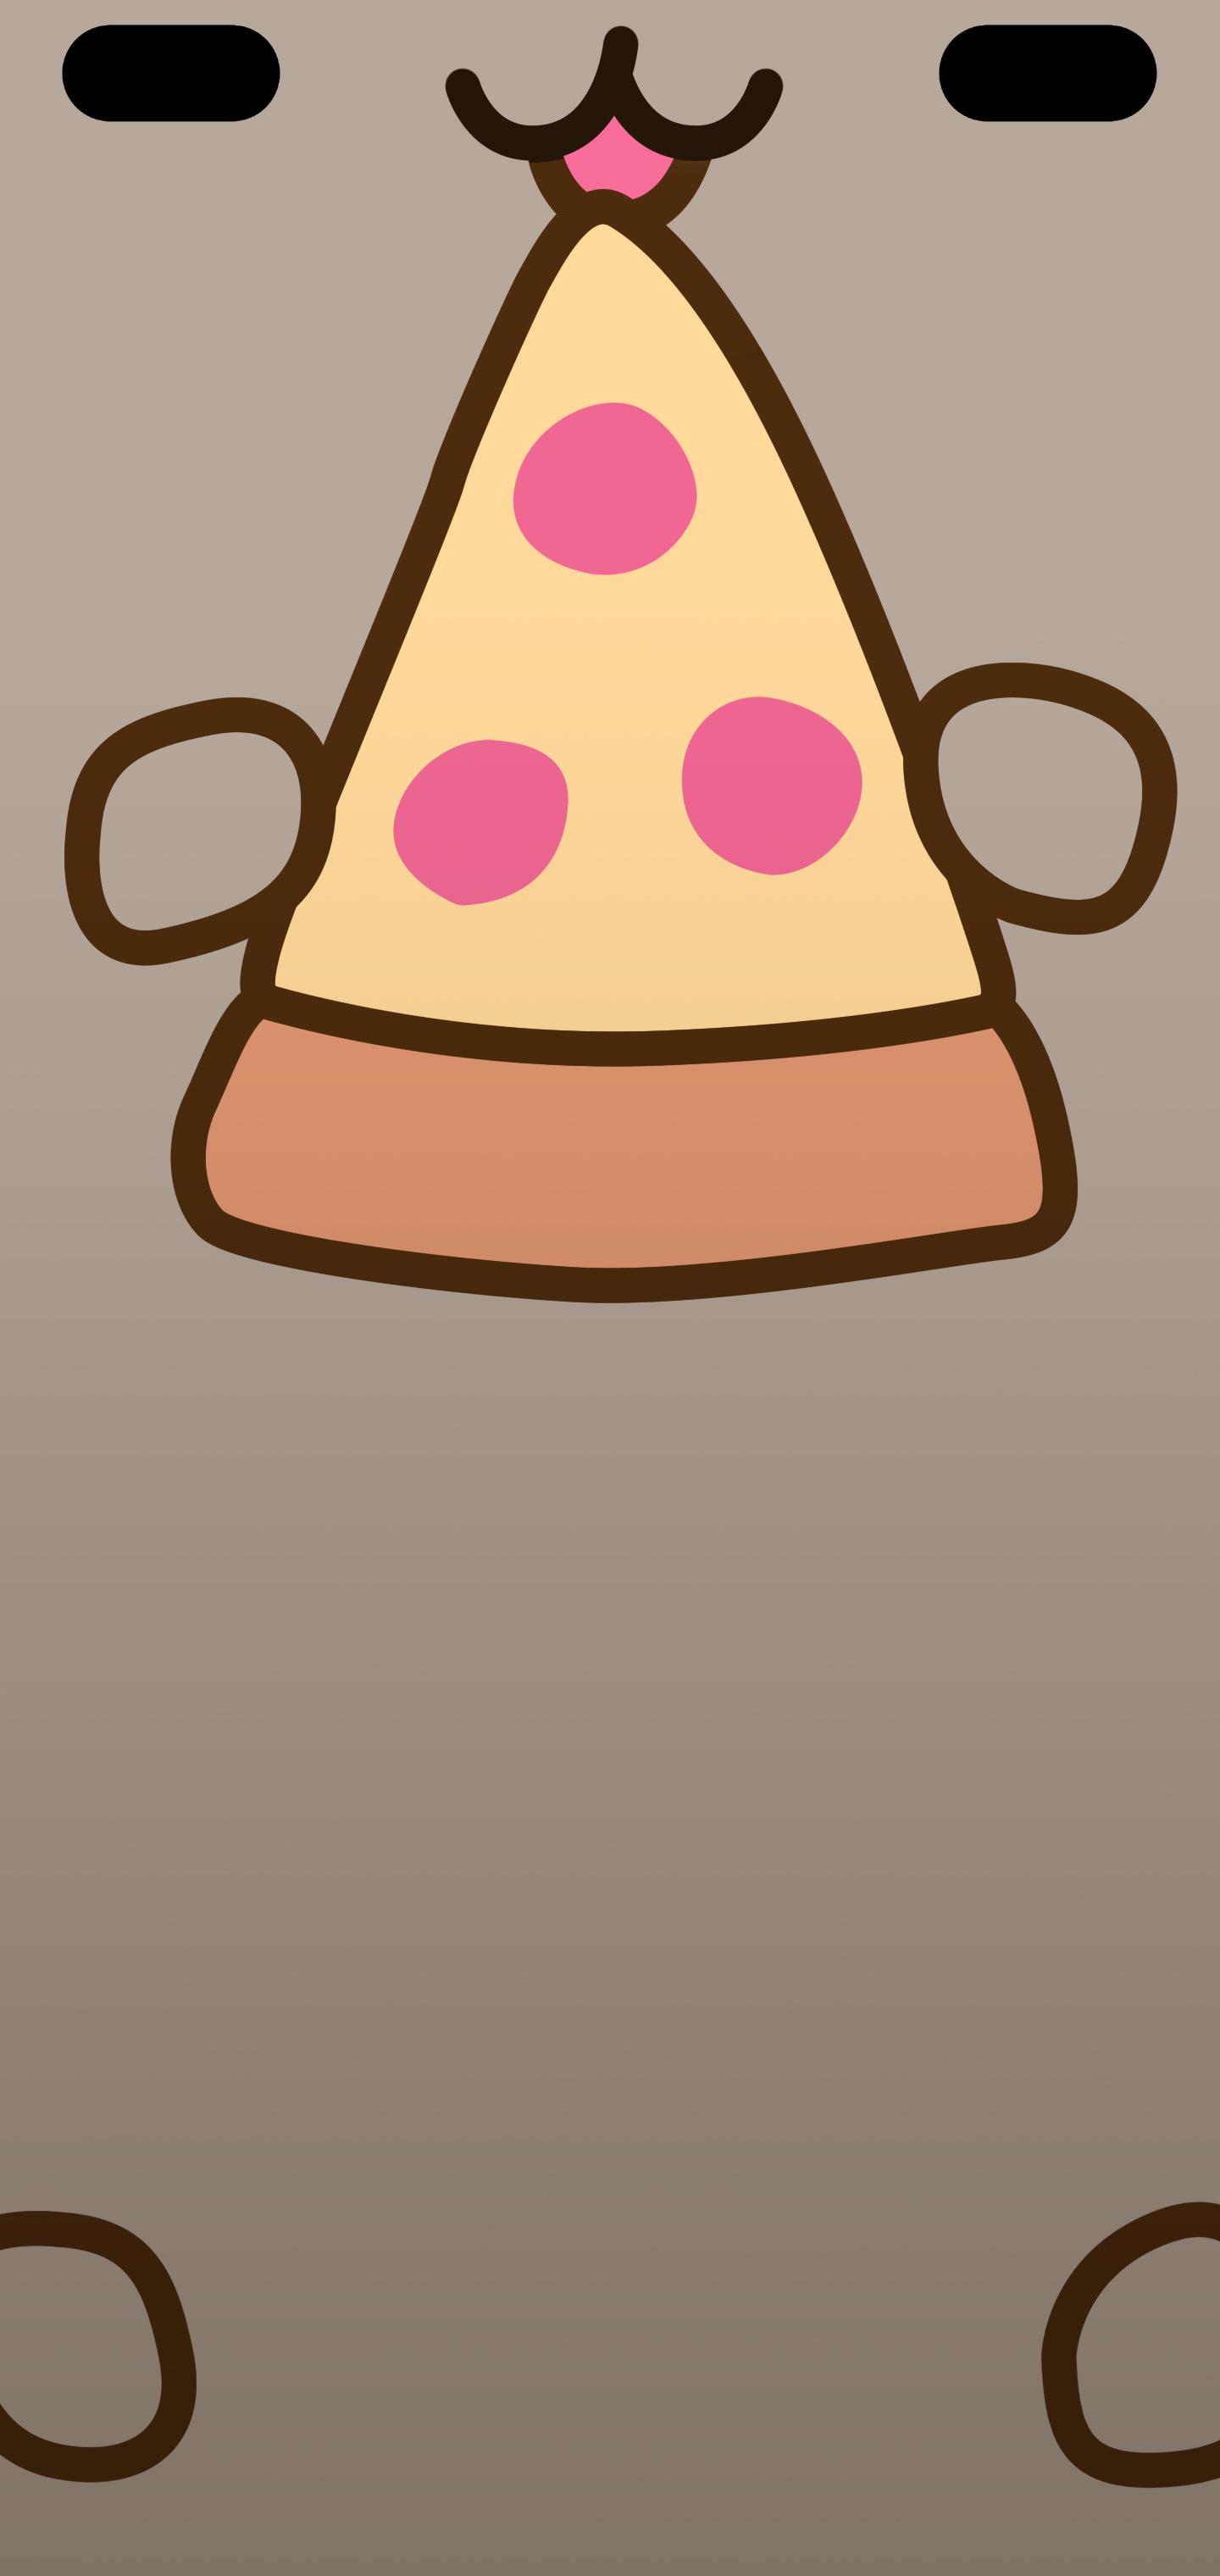 My brother made a Pusheen wallpaper for S10+